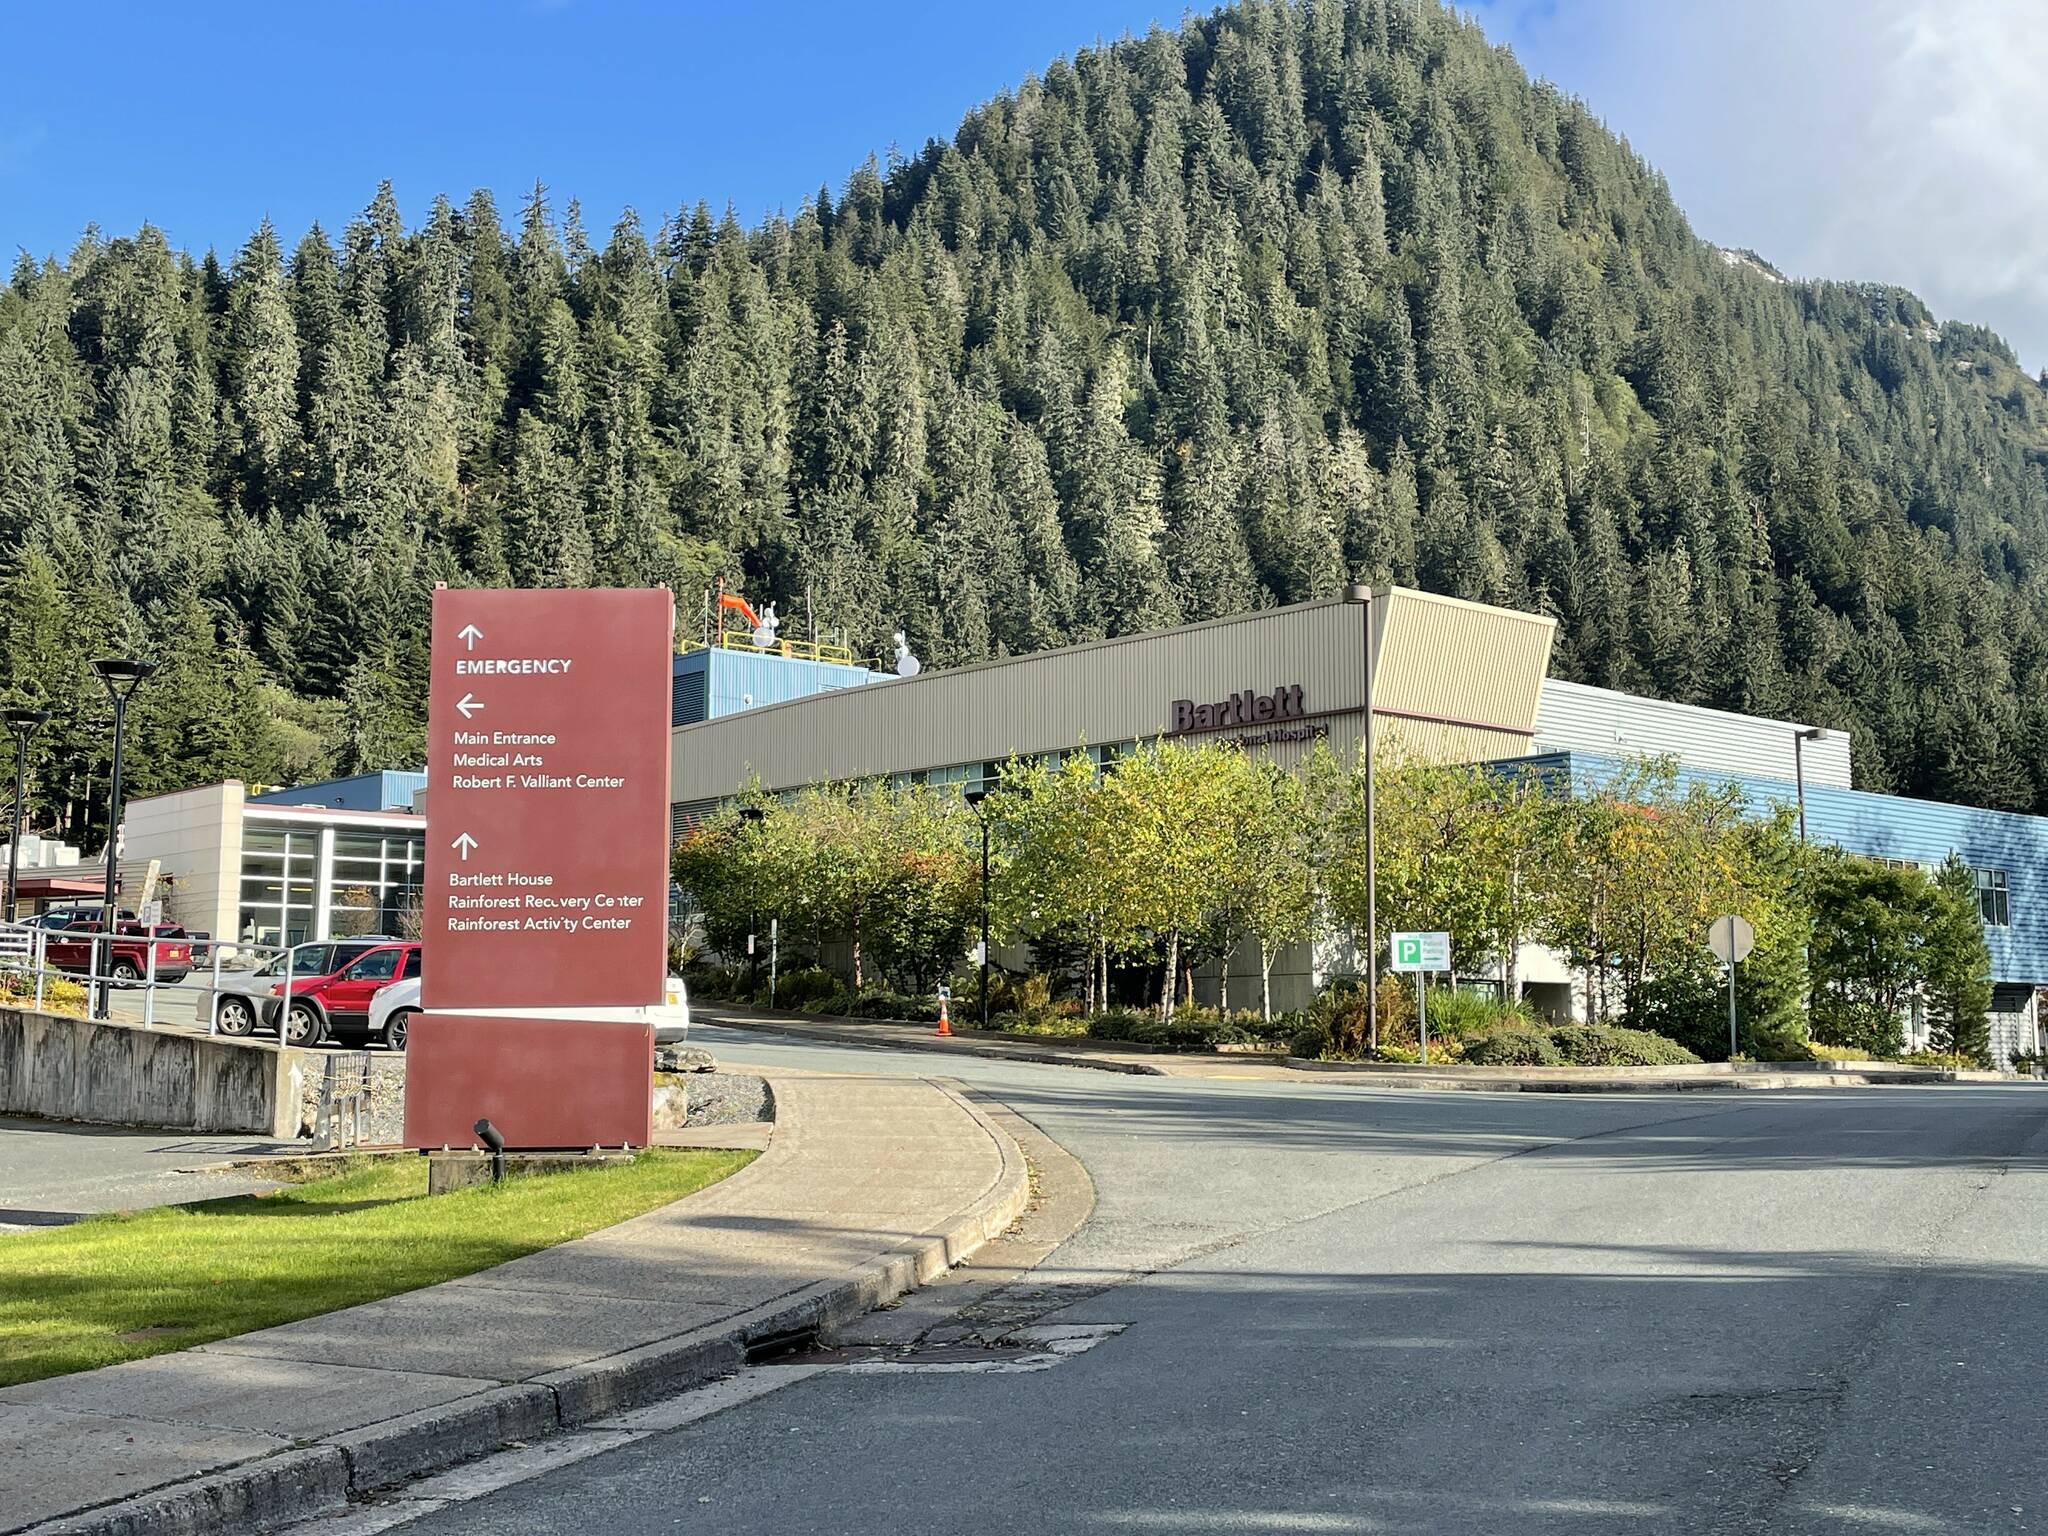 Bartlett Regional Hospital announced it is implementing a three-phase action plan to address its estimated $10 million deficit this fiscal year and its anticipated $2 million loss during the upcoming fiscal year. (Michael S. Lockett / Juneau Empire File)